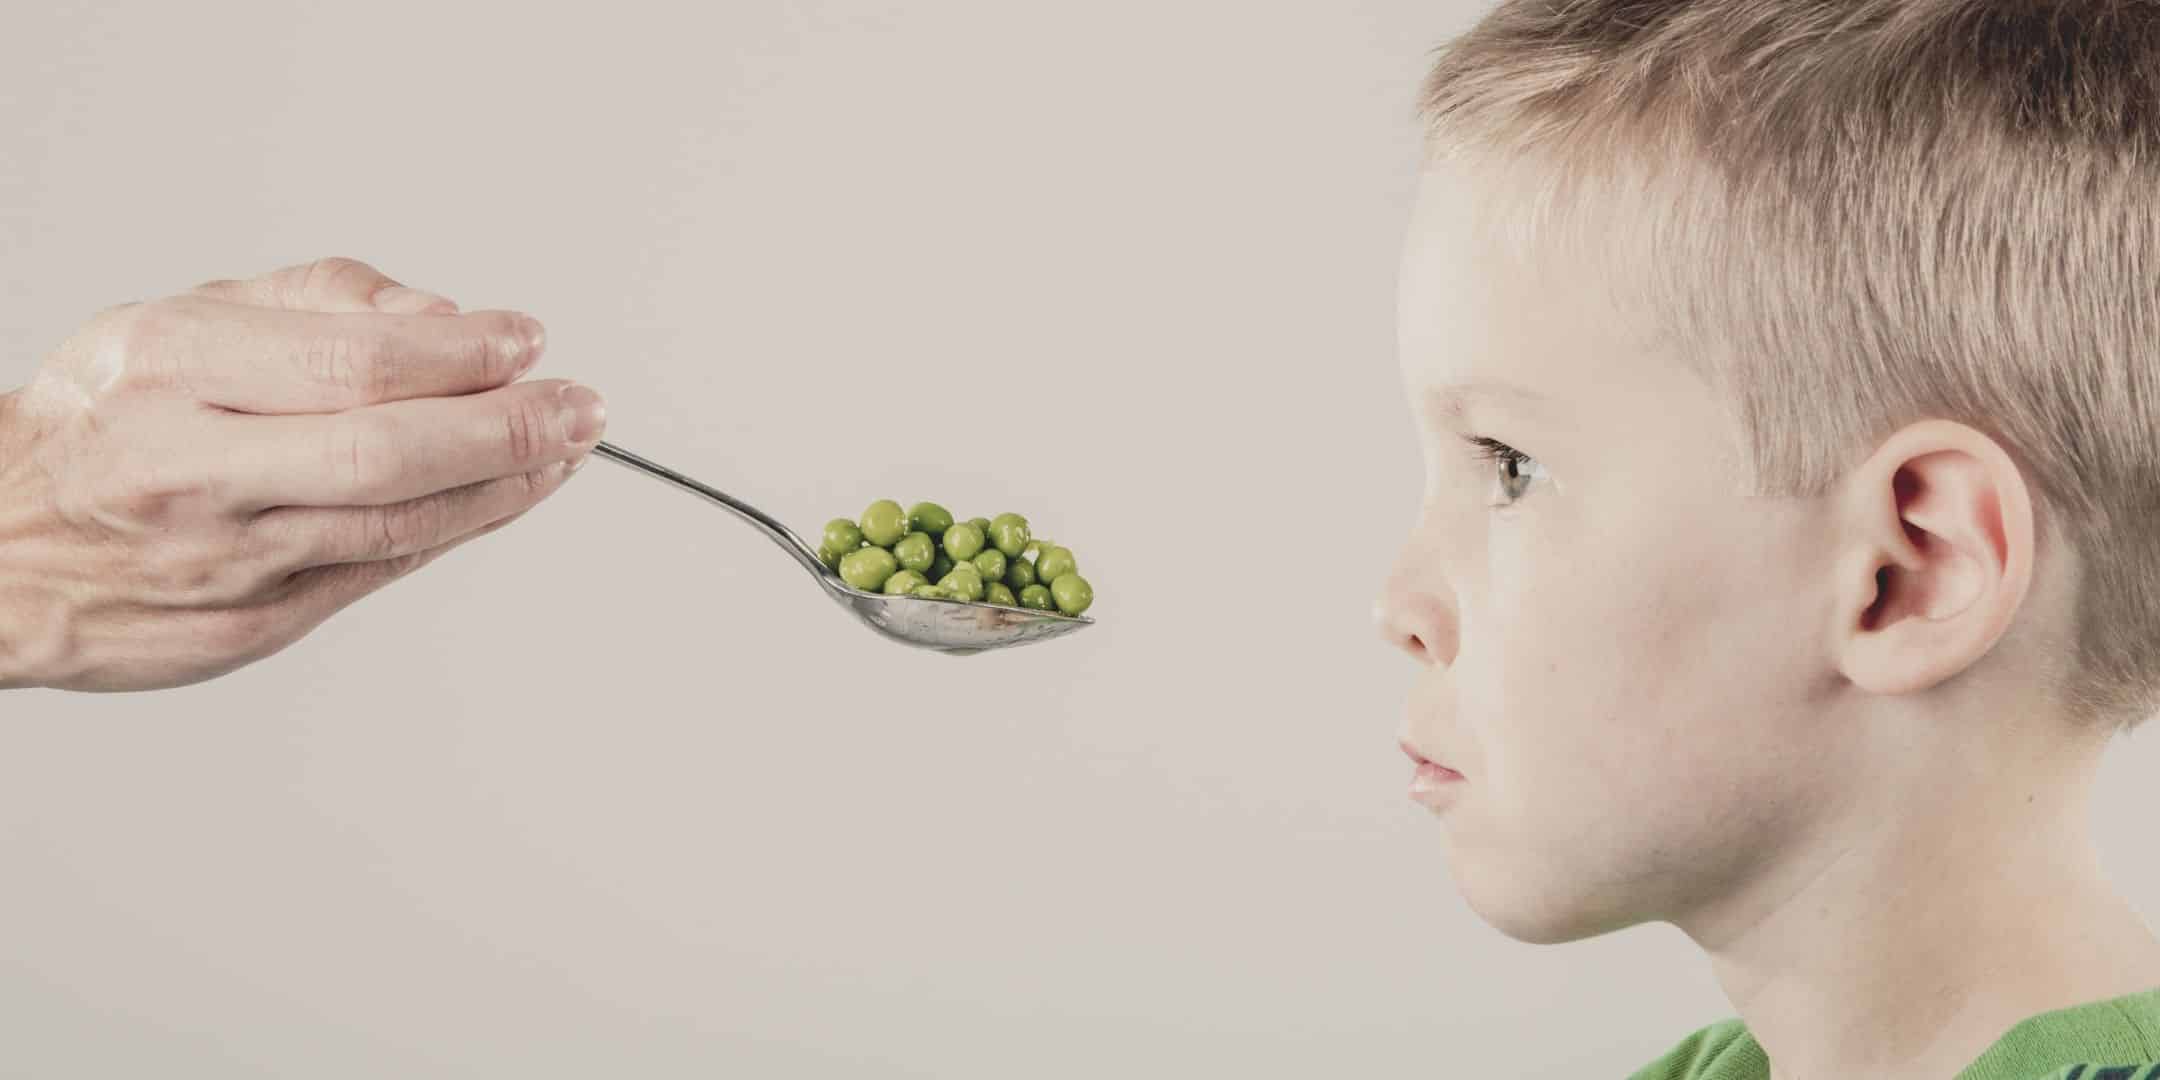 hand feeding peas to a picky eater child with mouth closed